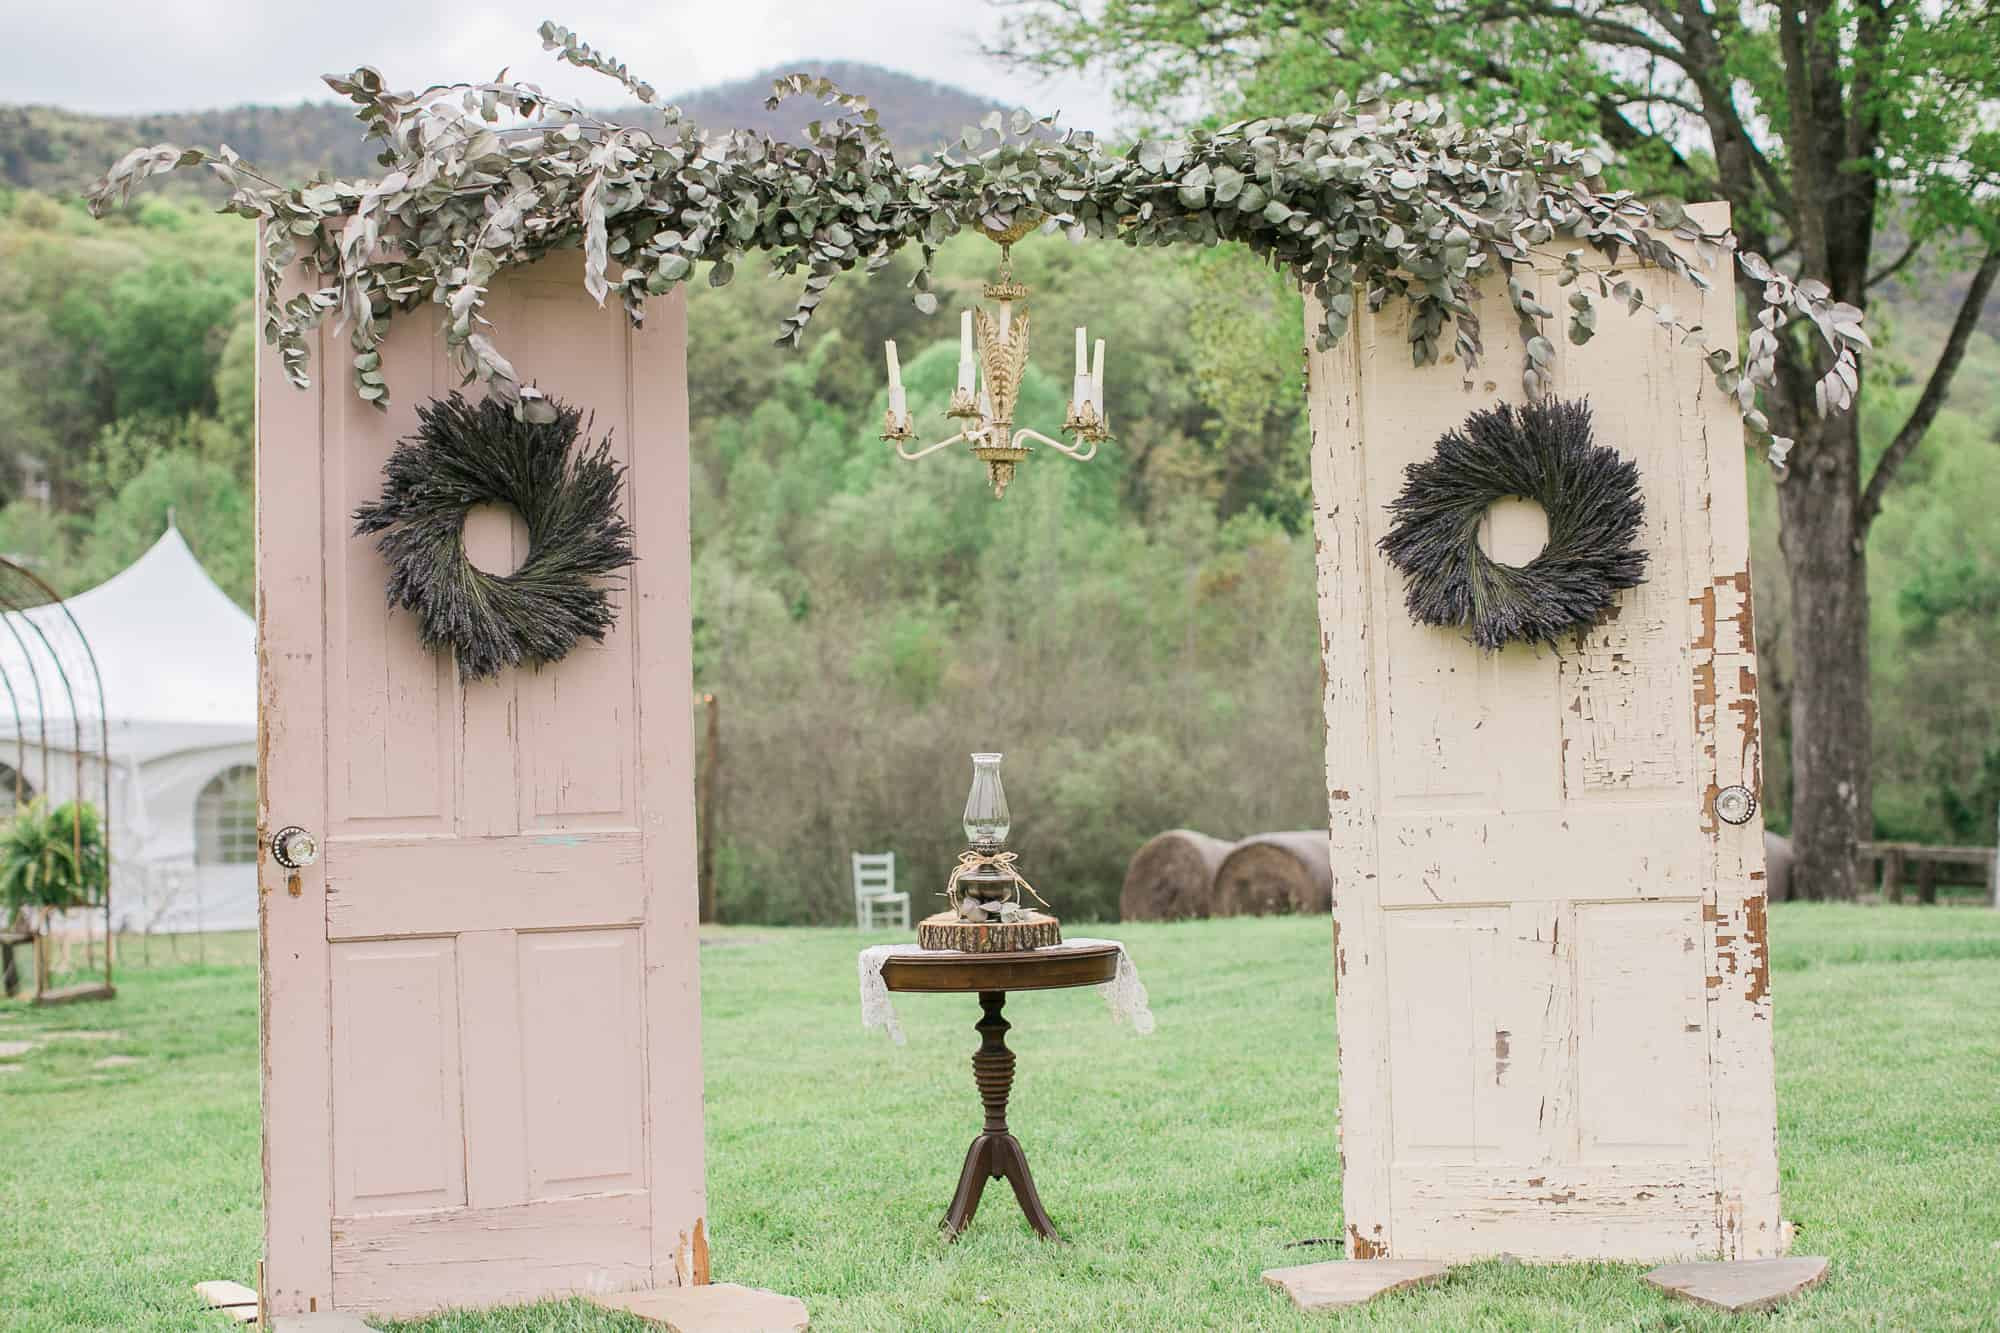 DIY Wedding Arches Ideas
 15 DIY Wedding Arches To Highlight Your Ceremony With